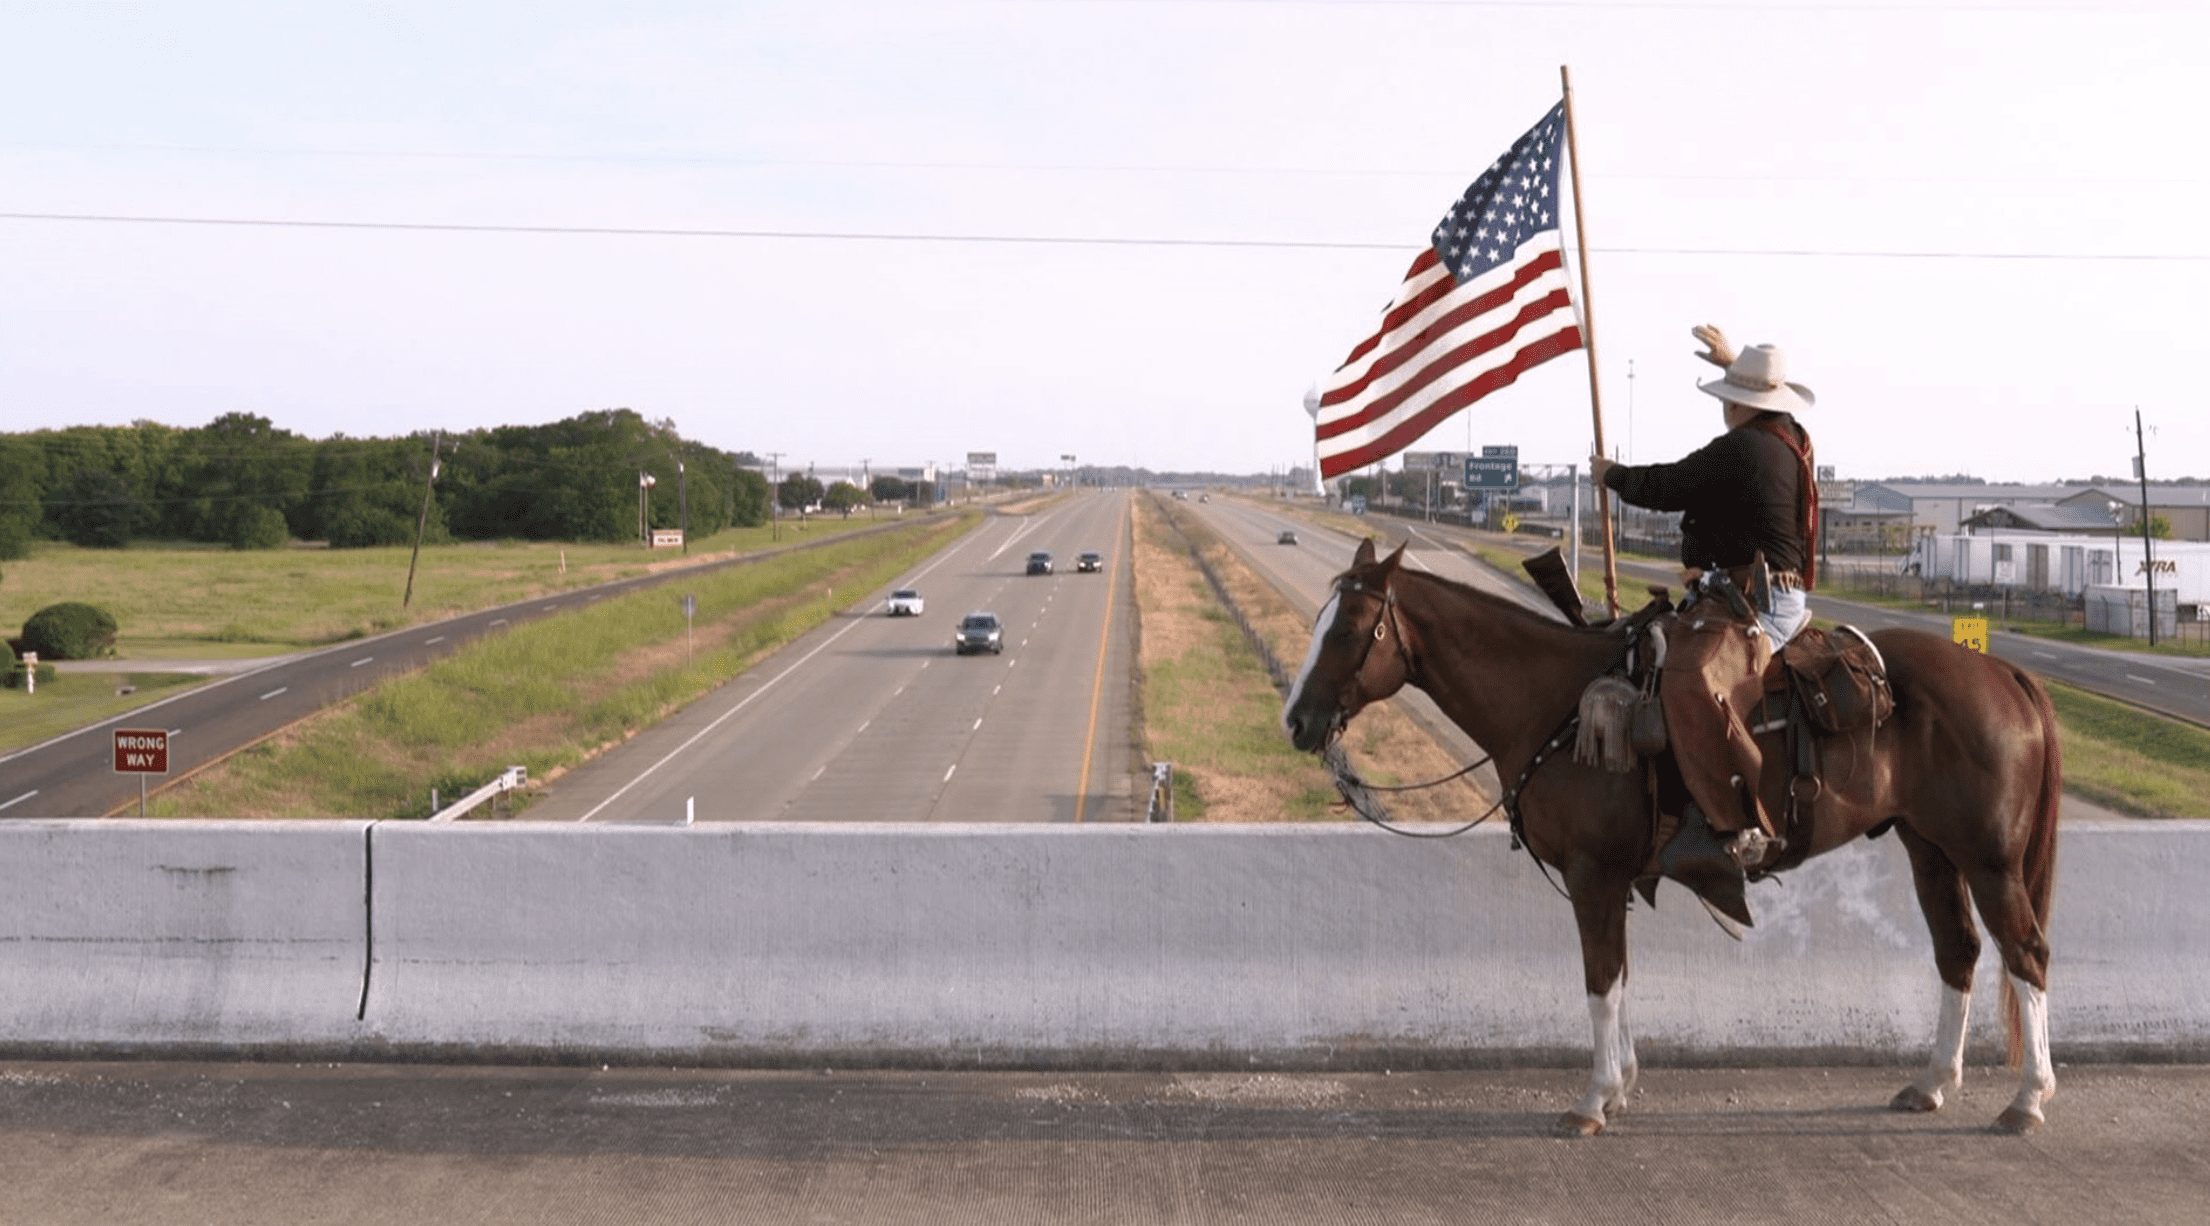 Ellis County Cowboy Spreads Happiness on the Highway